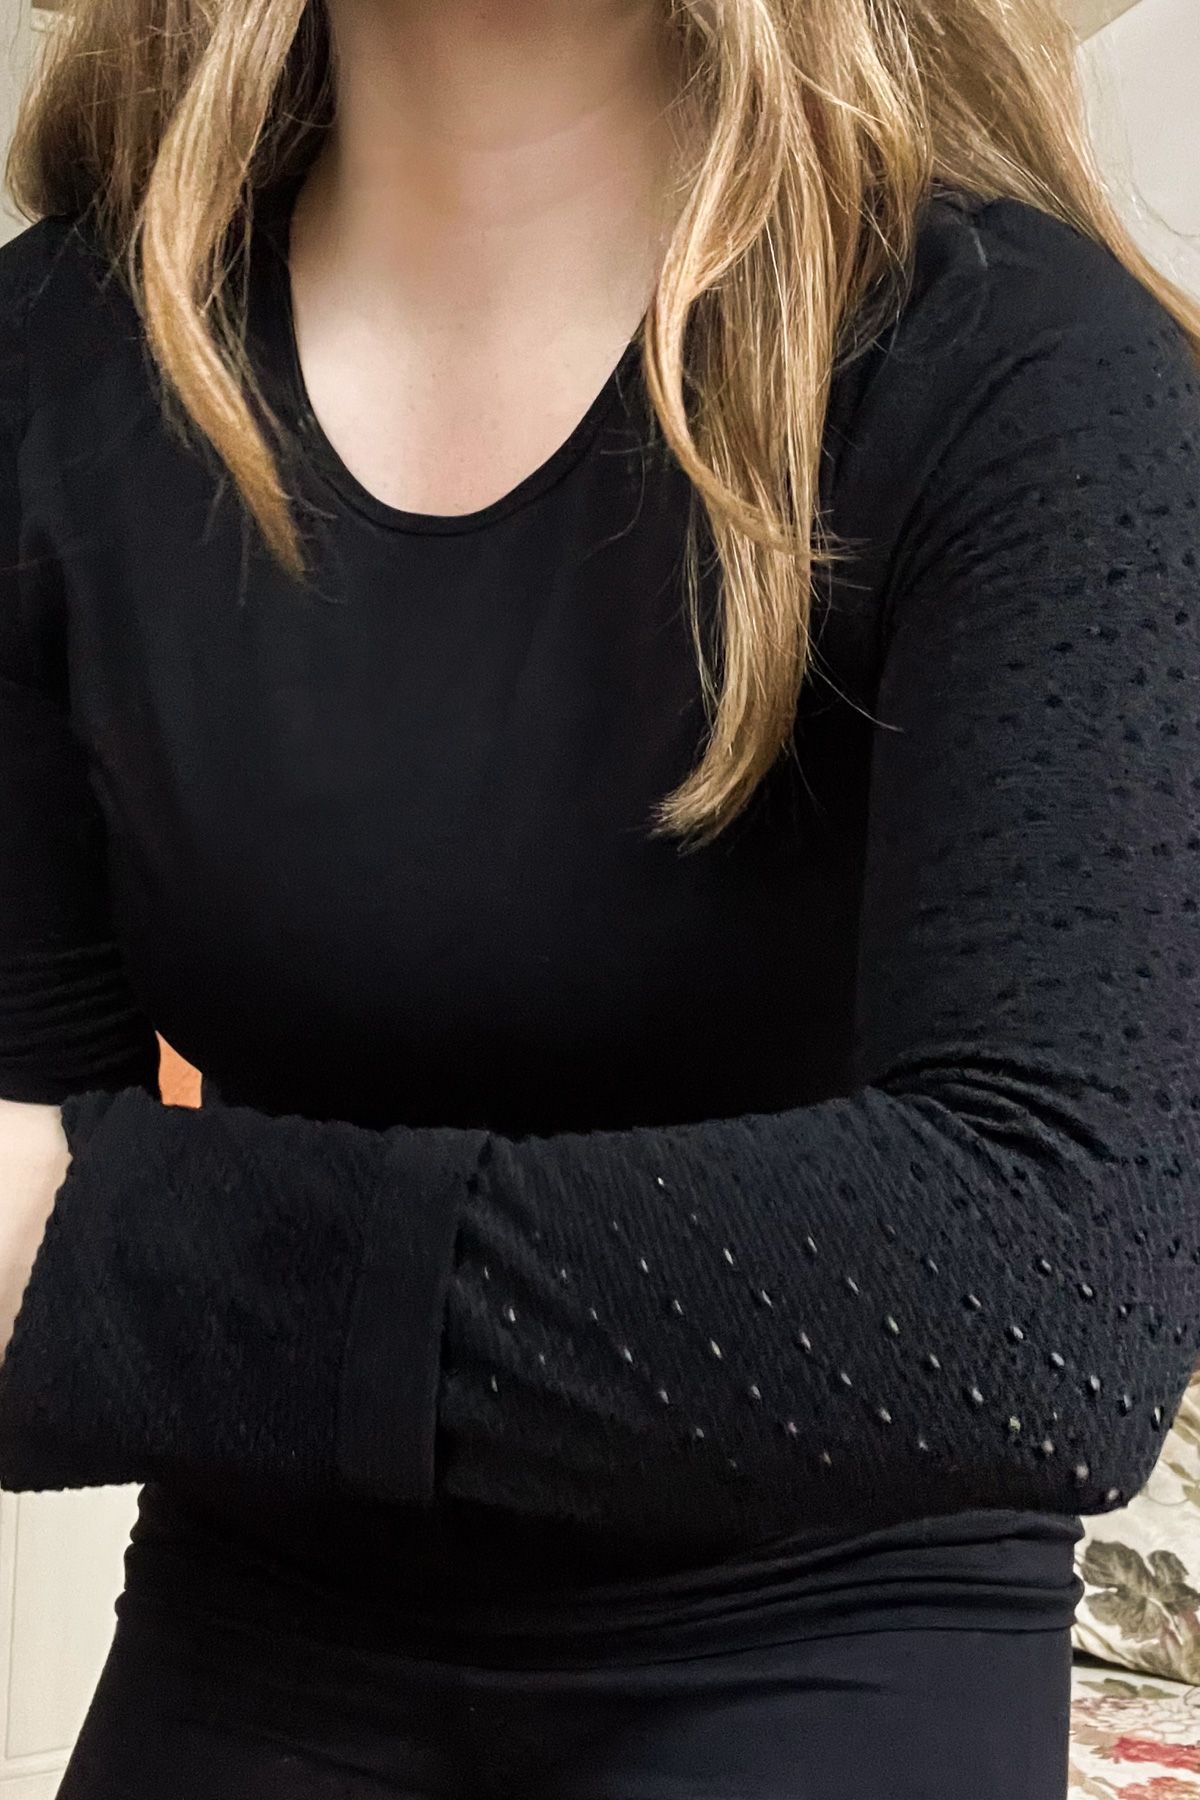 Close-up of a young woman's arm in a long-sleeved black top and black leggings.